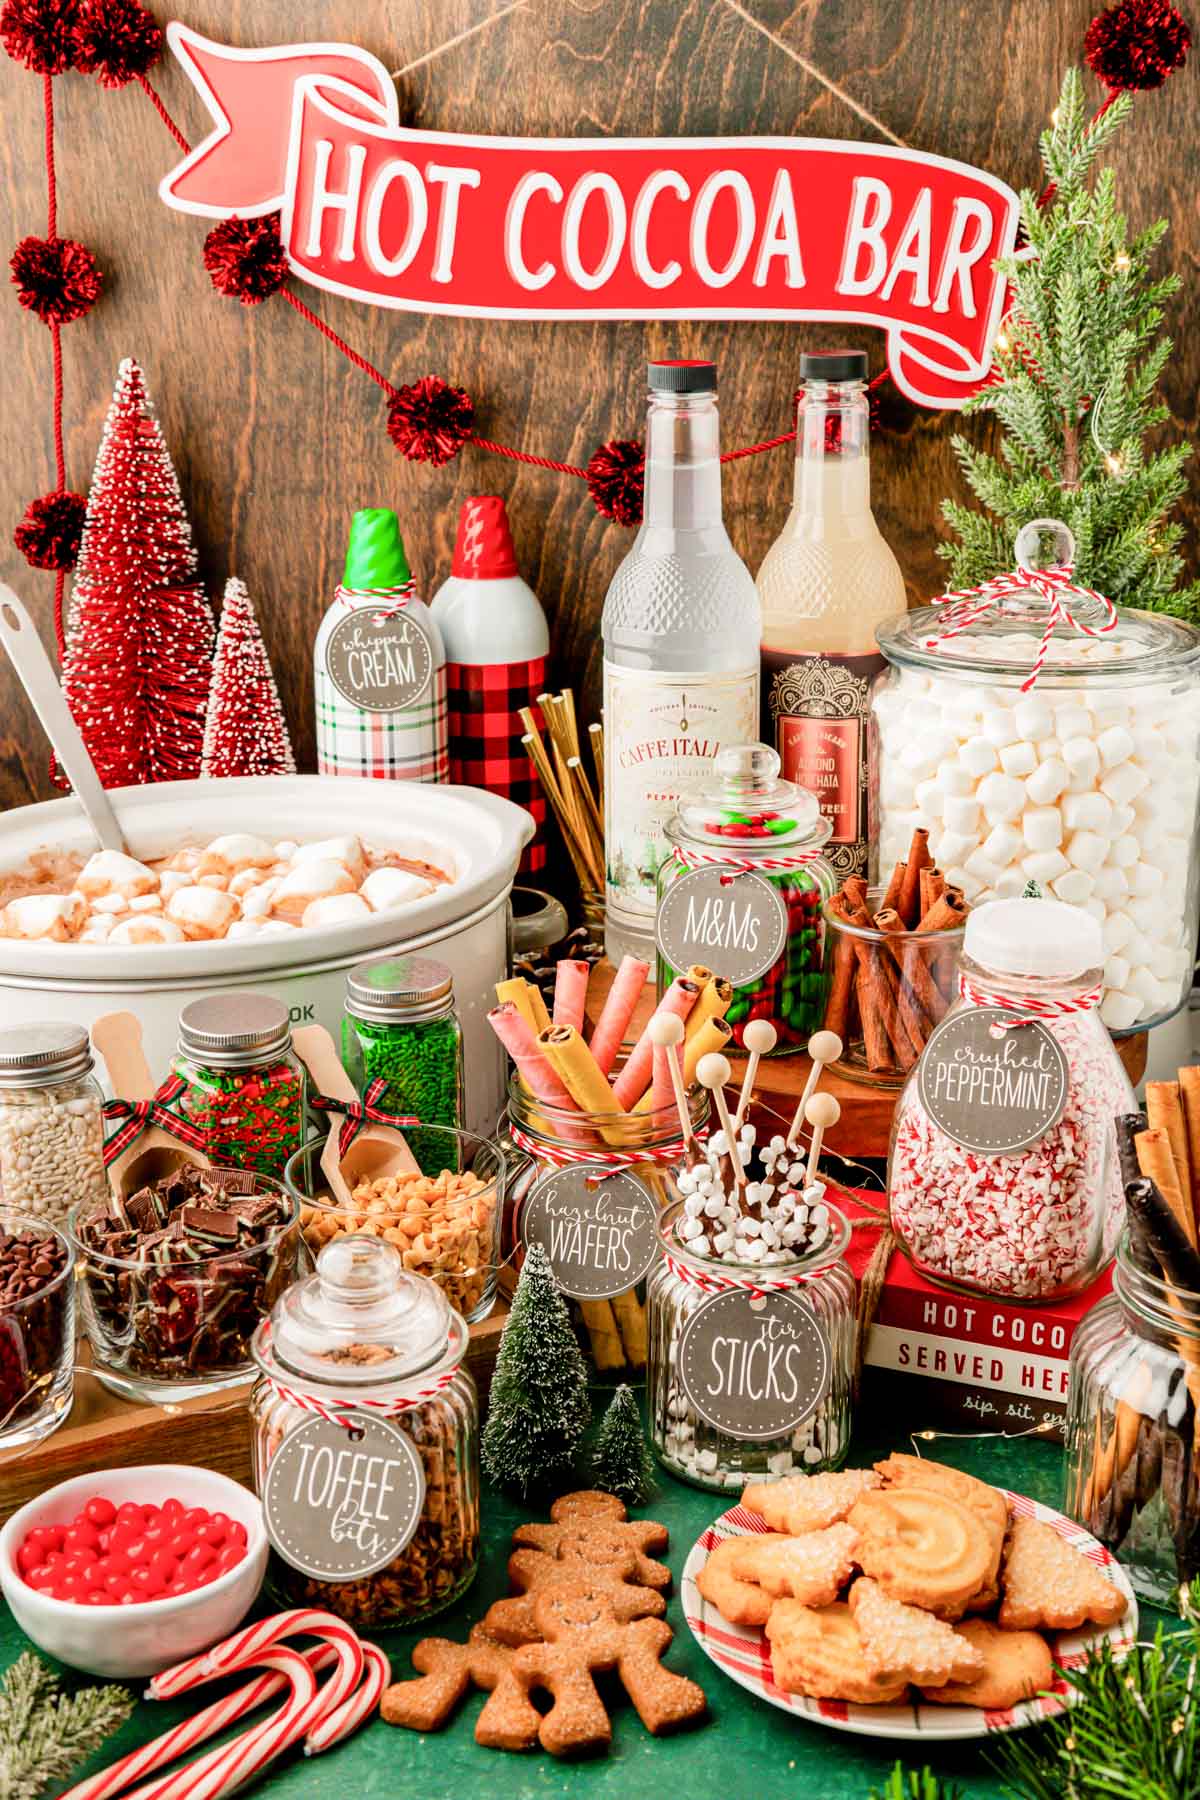 A hot chocolate bar set up on a table.